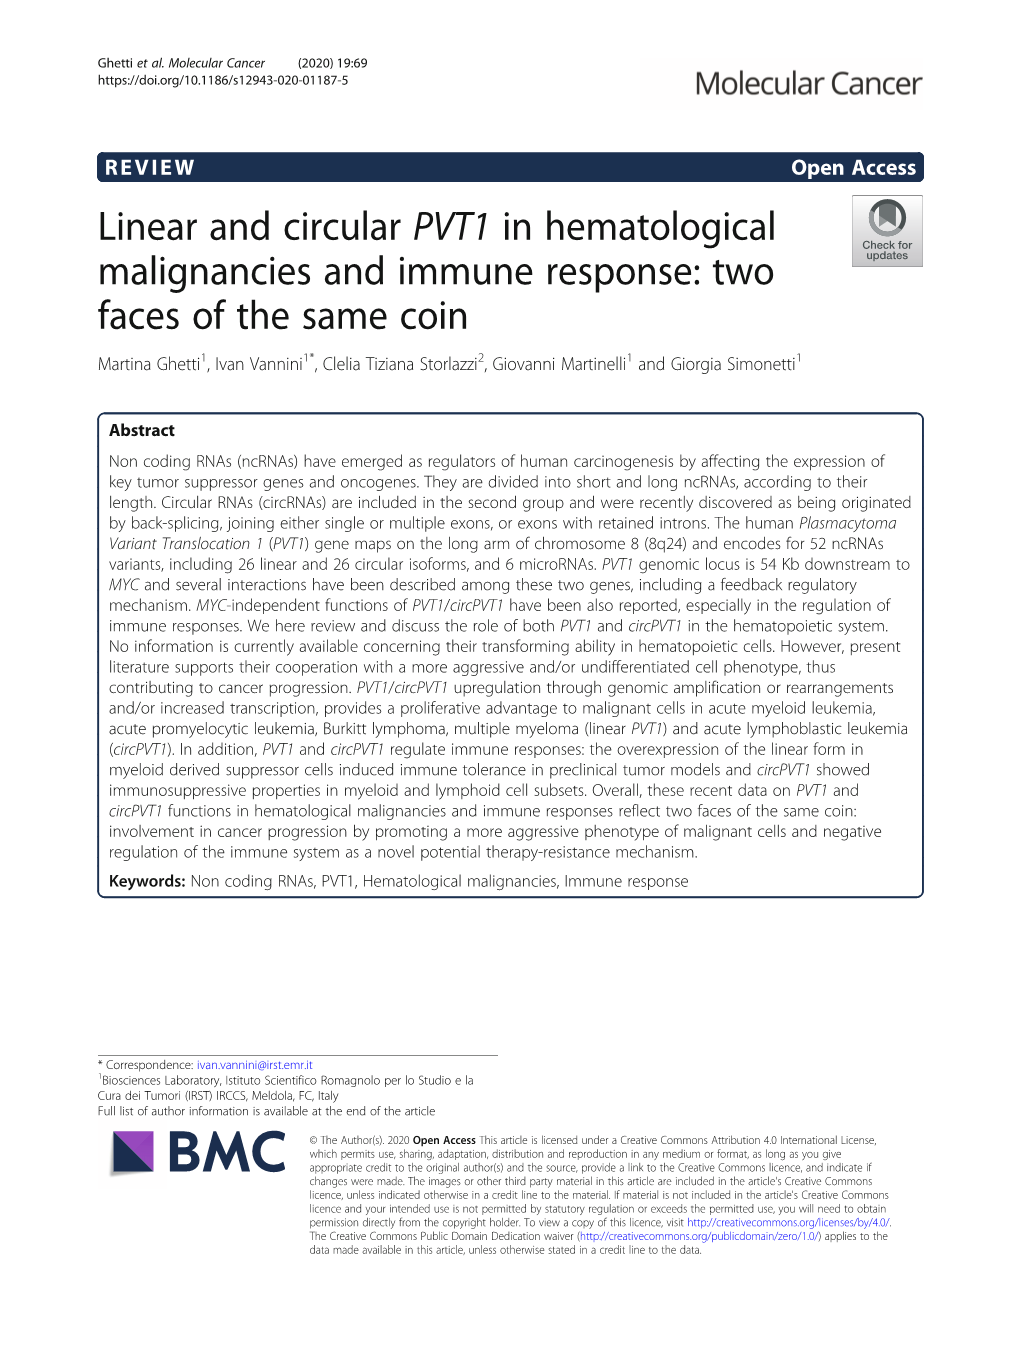 Linear and Circular PVT1 in Hematological Malignancies And